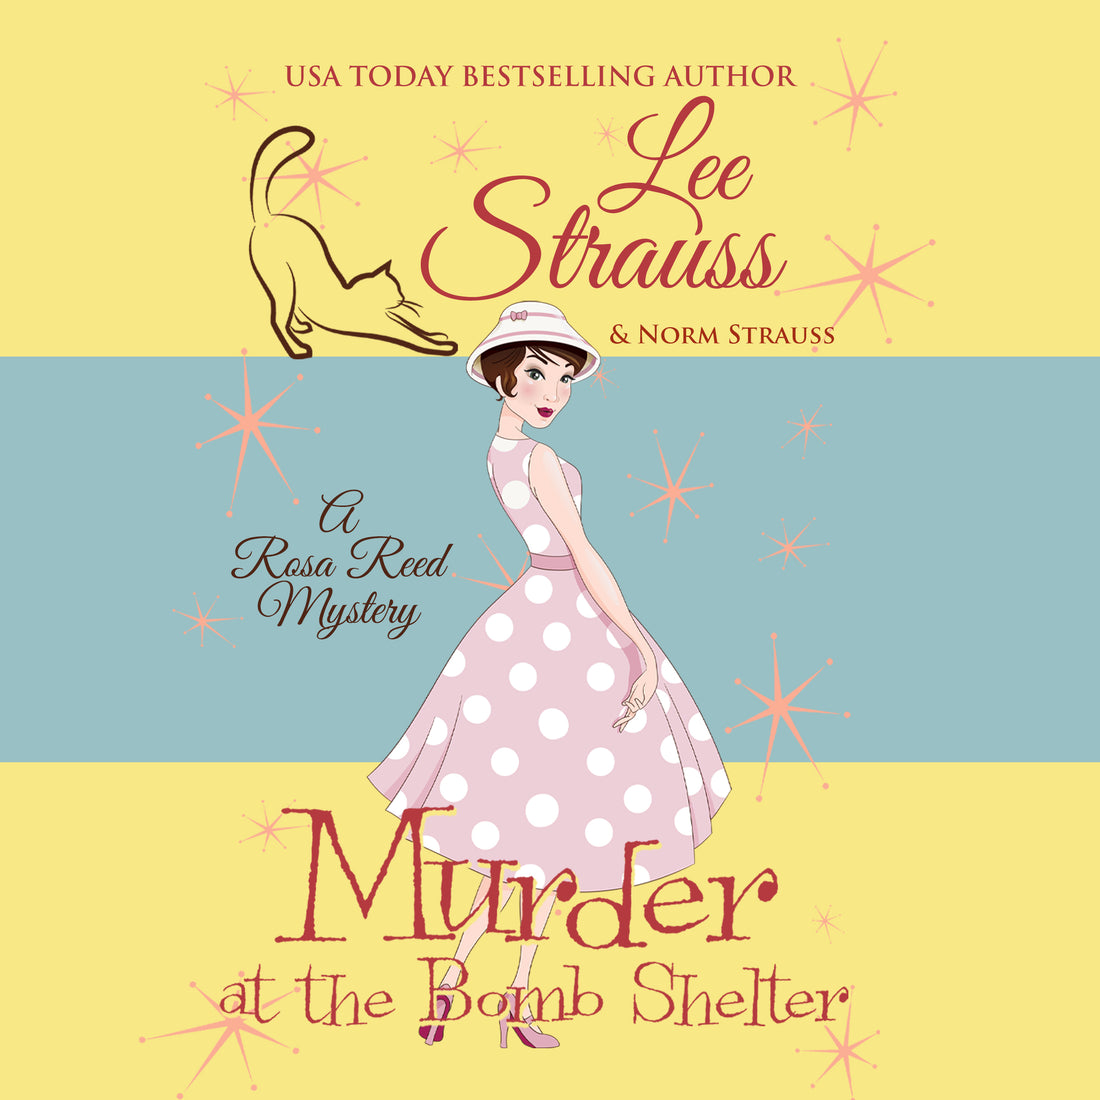 12 Days of Christmas Audio Book Giveaway - Day 3 - Murder at the Bomb Shelter